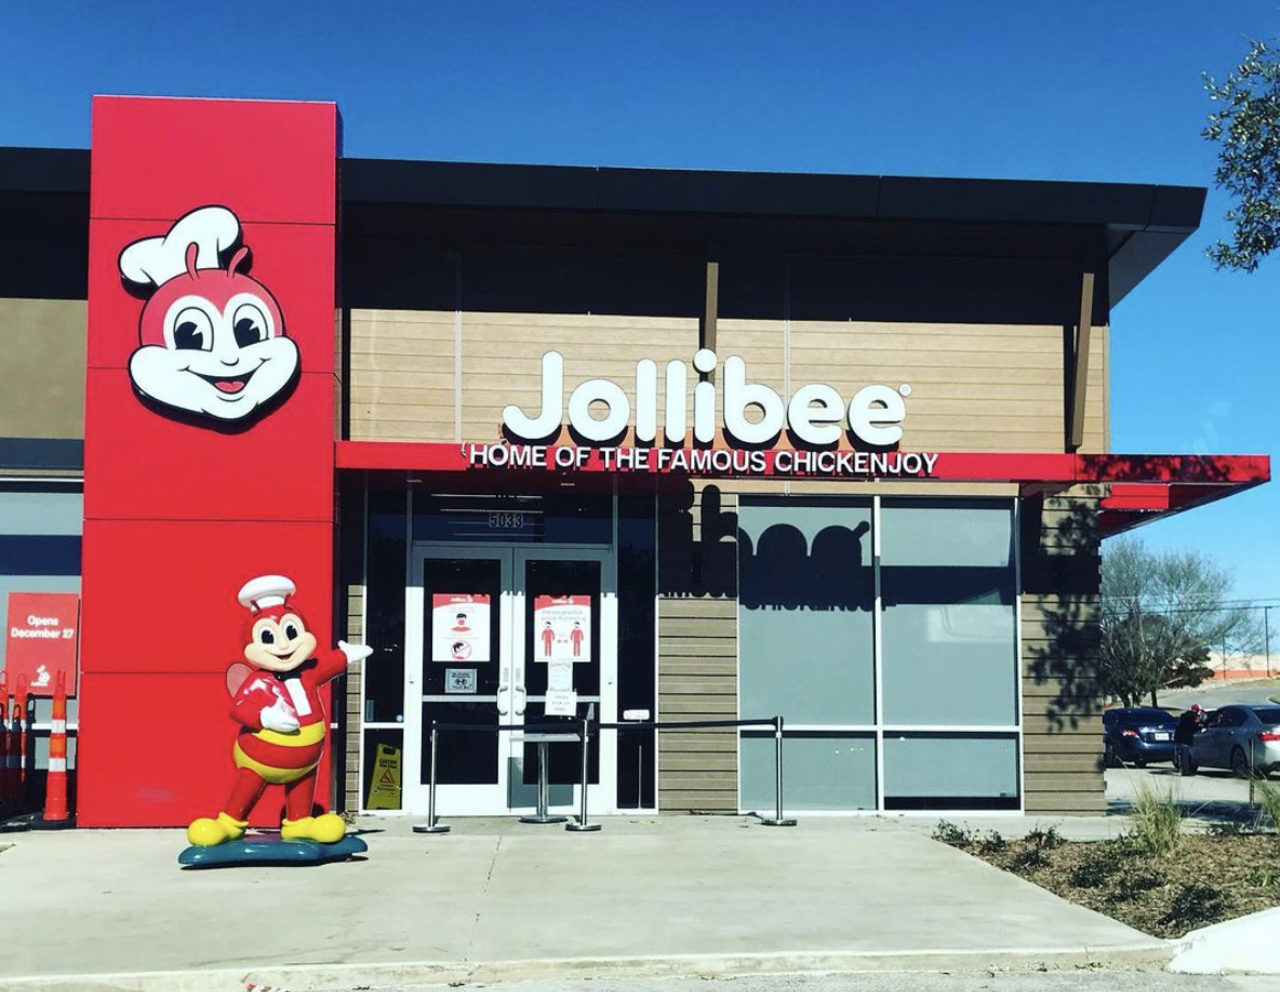 Jollibee
5033 Northwest Loop 410, jollibeeusa.com
When Filipino comfort food chain Jollibee opened its first SA location at the end of December, diehard fans lined up as early as 7 a.m. to get their hands on their Chickenjoy, Yumburgers and Palabok Fiesta. 
Photo via Instagram / adobotestkitchen